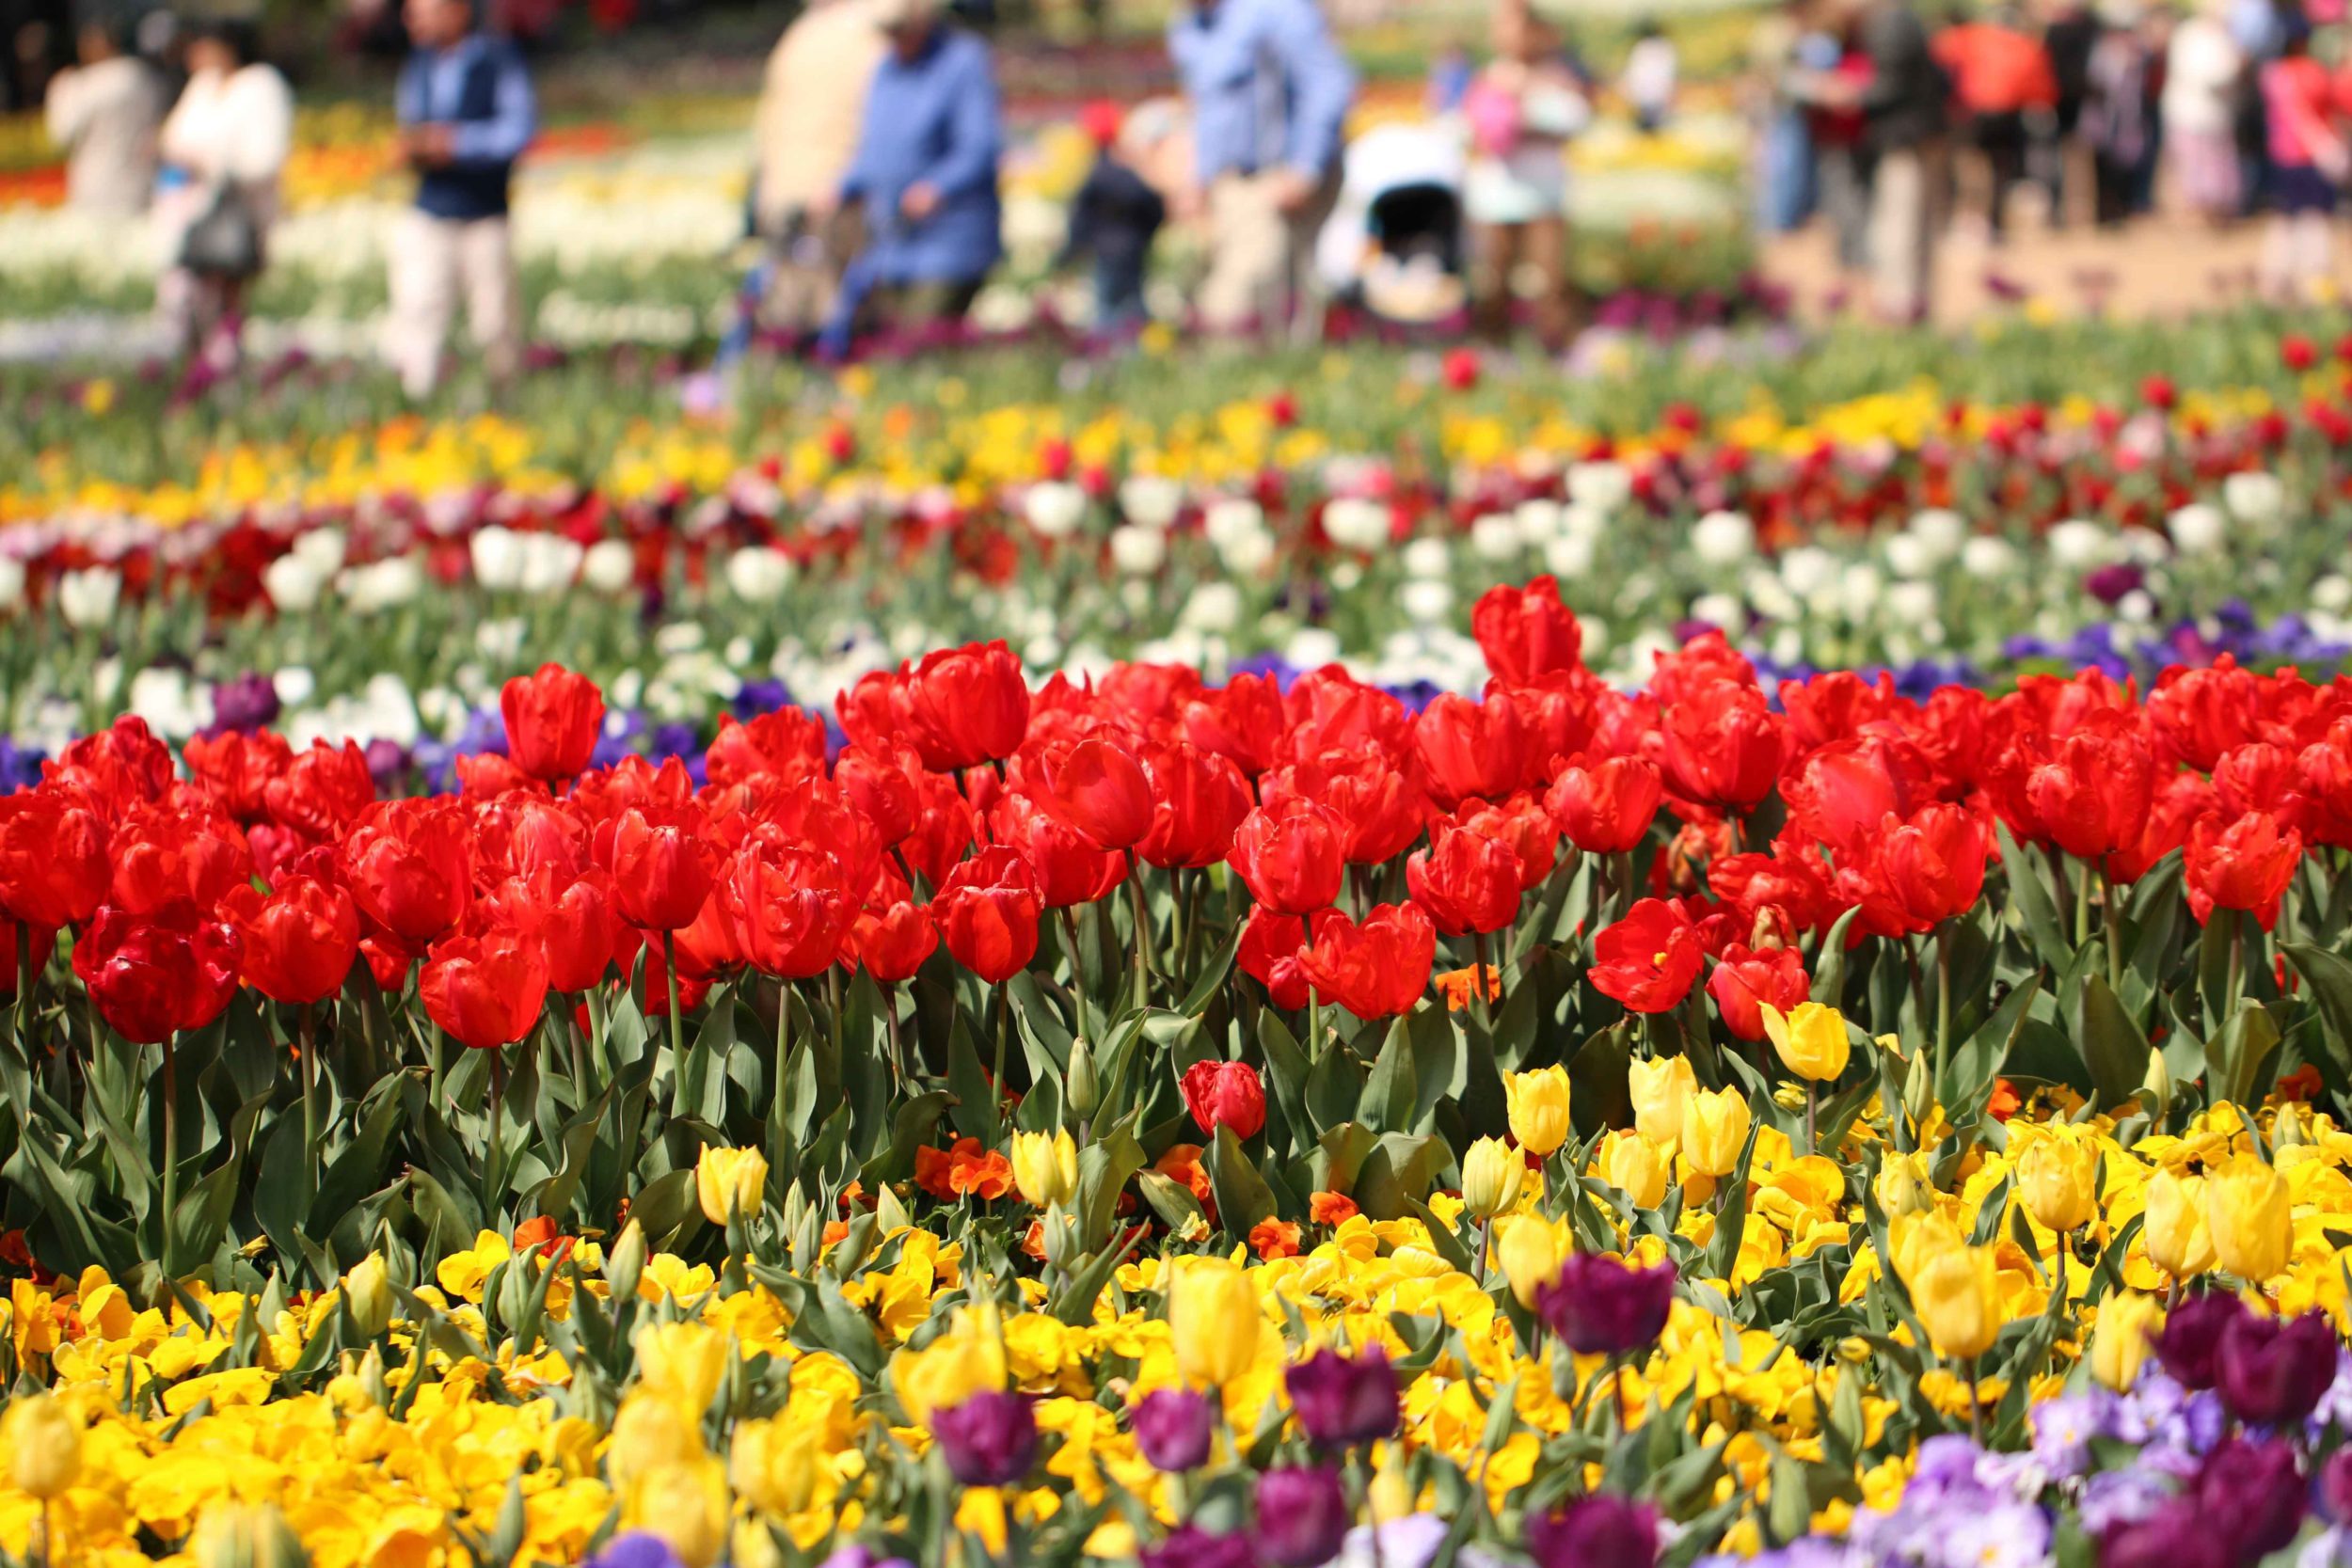 Main Flower Display at Floriade in Canberra